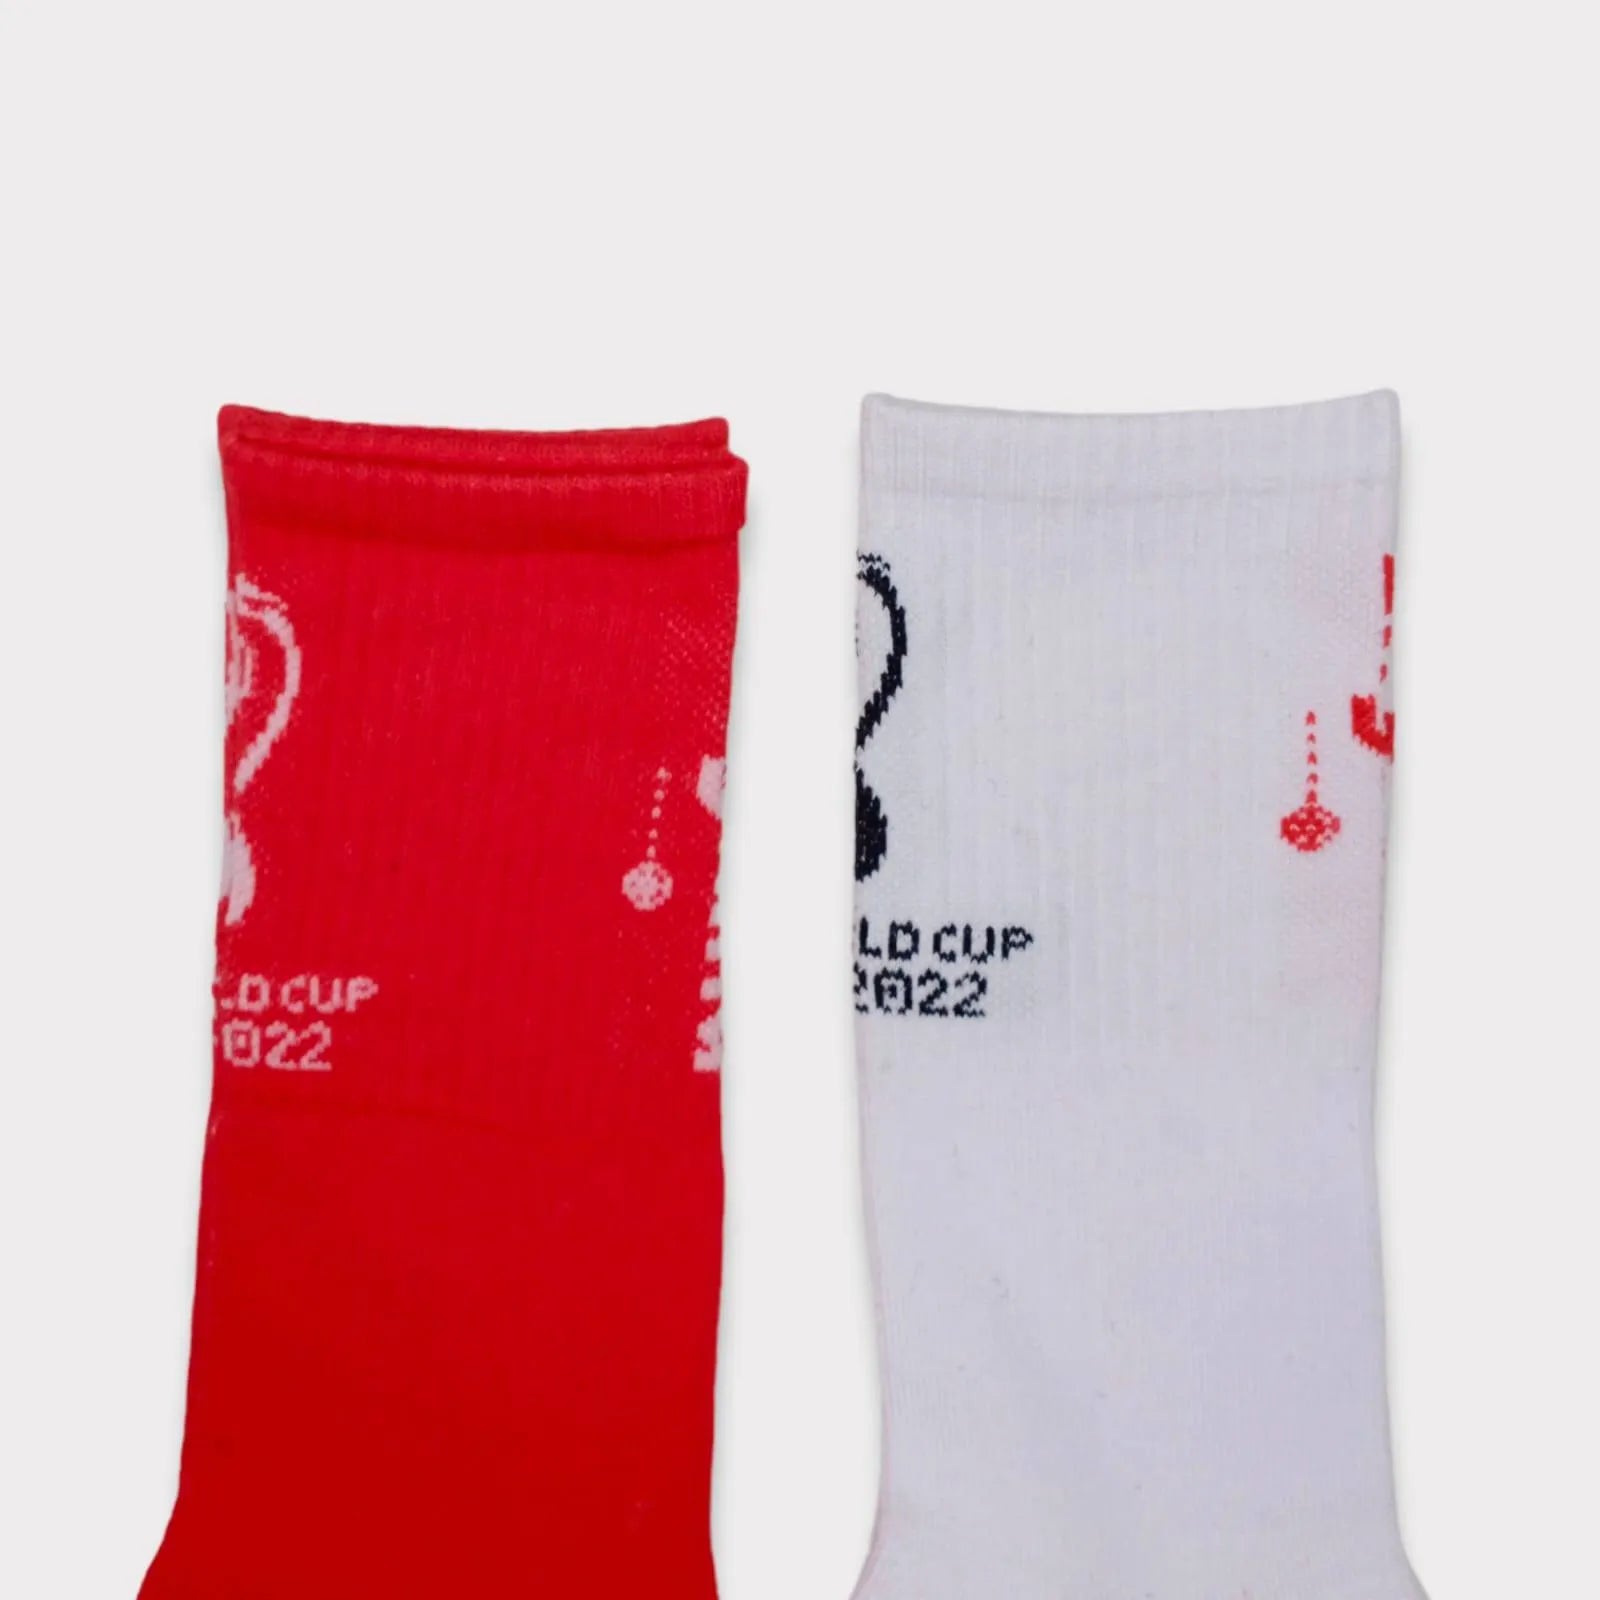 FIFA England Boys Socks Show your England pride with this 2-pack (mention sizes if relevant). white & red, FIFA official, comfortable, stylish.